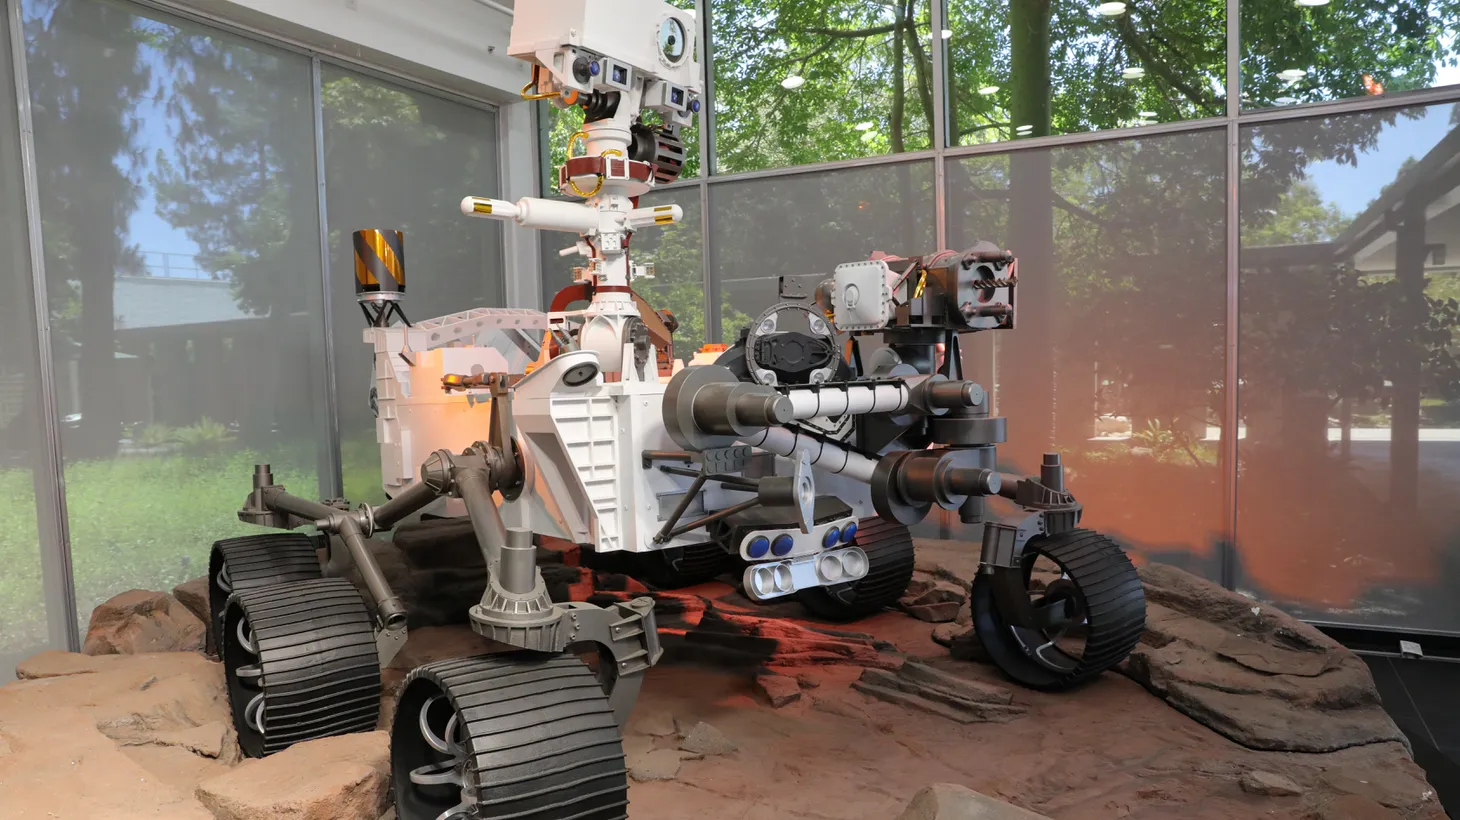 A model of NASA’s Perseverance rover is seen at JPL. The original rover landed on Mars on February 18, 2021. The rover is designed to better understand the geology of Mars and seek signs of ancient life.